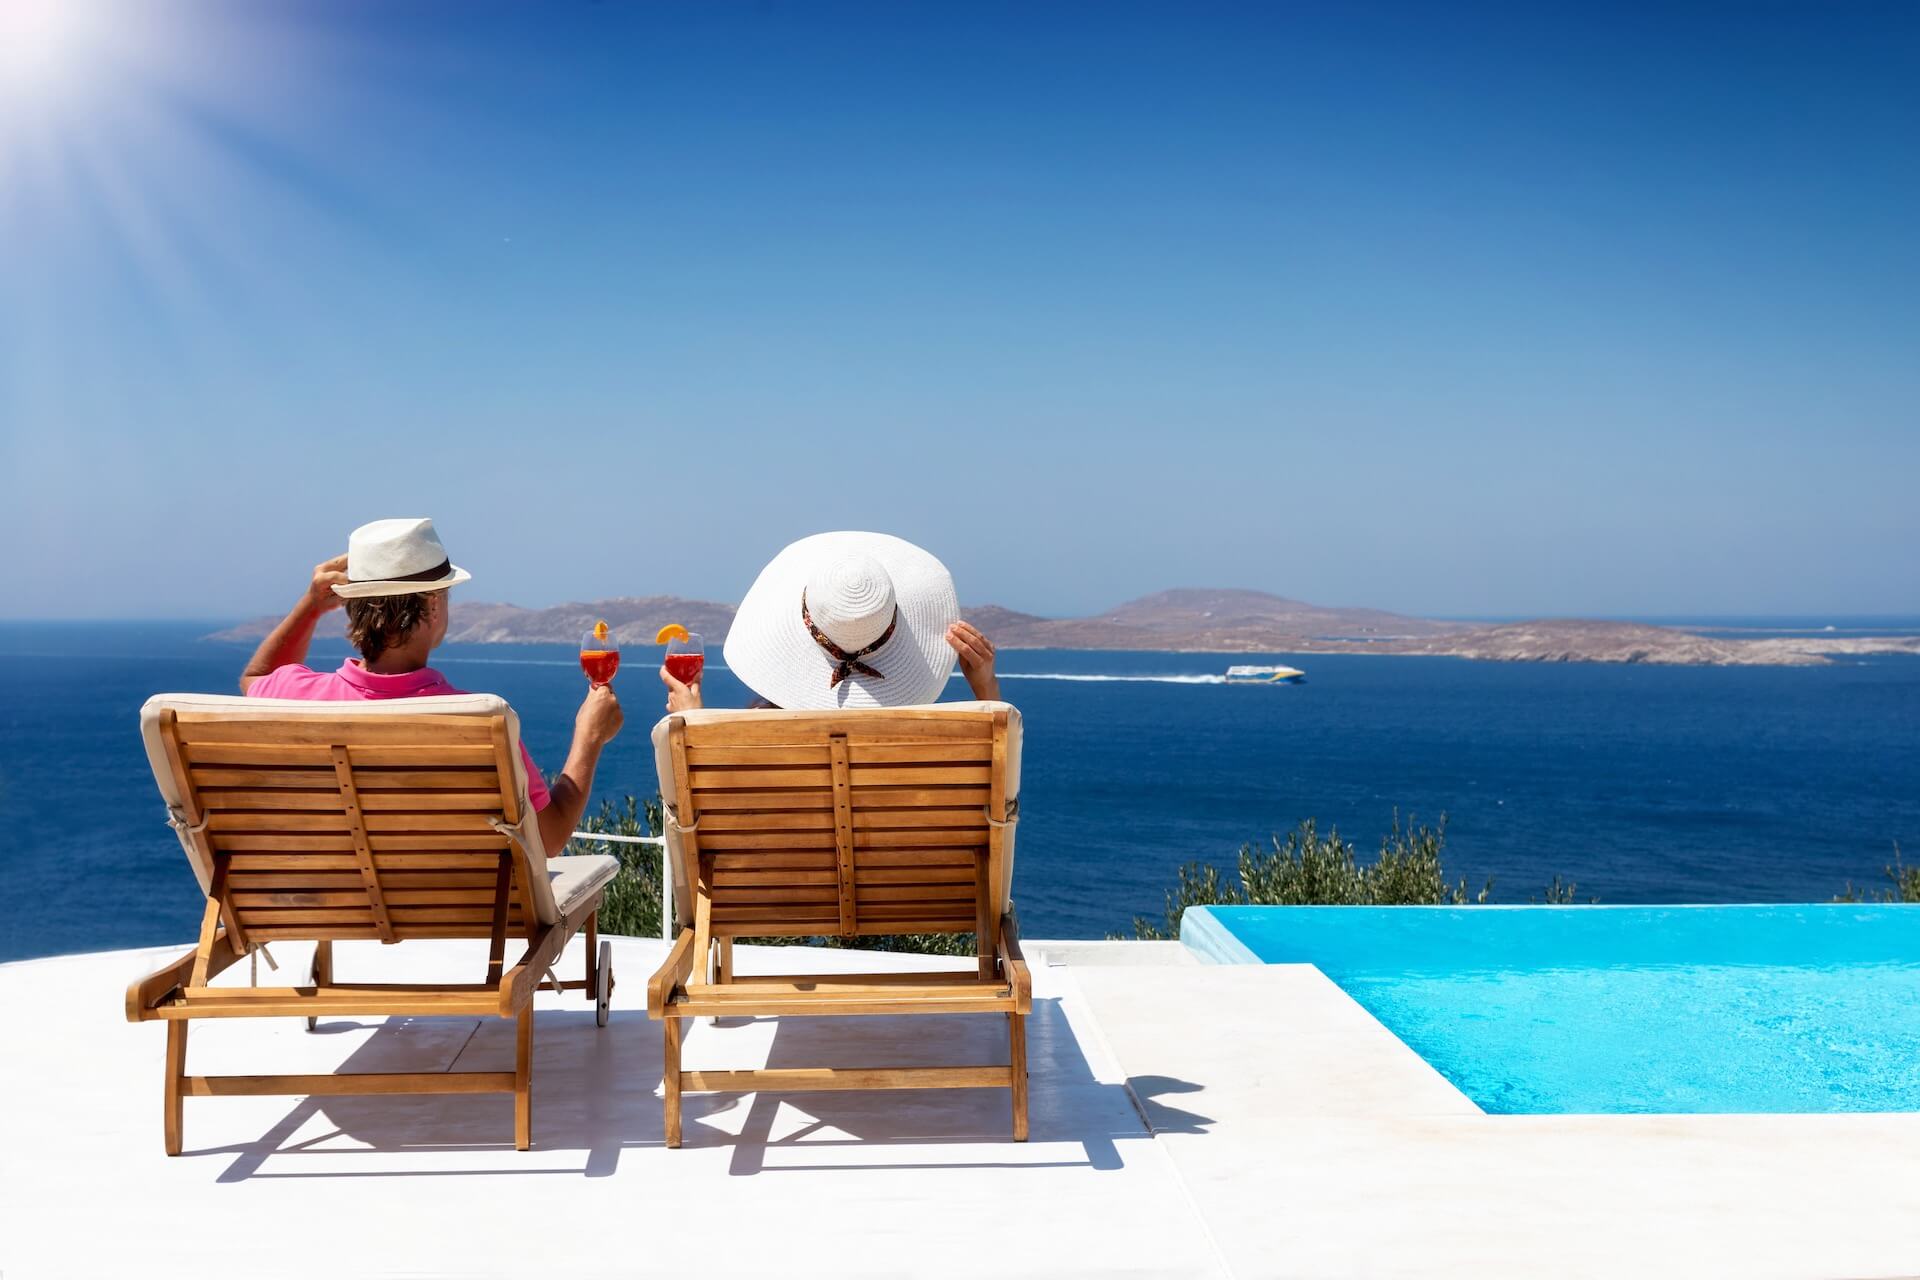 A couple relaxing in one of the private Mykonos villas looking over the beach